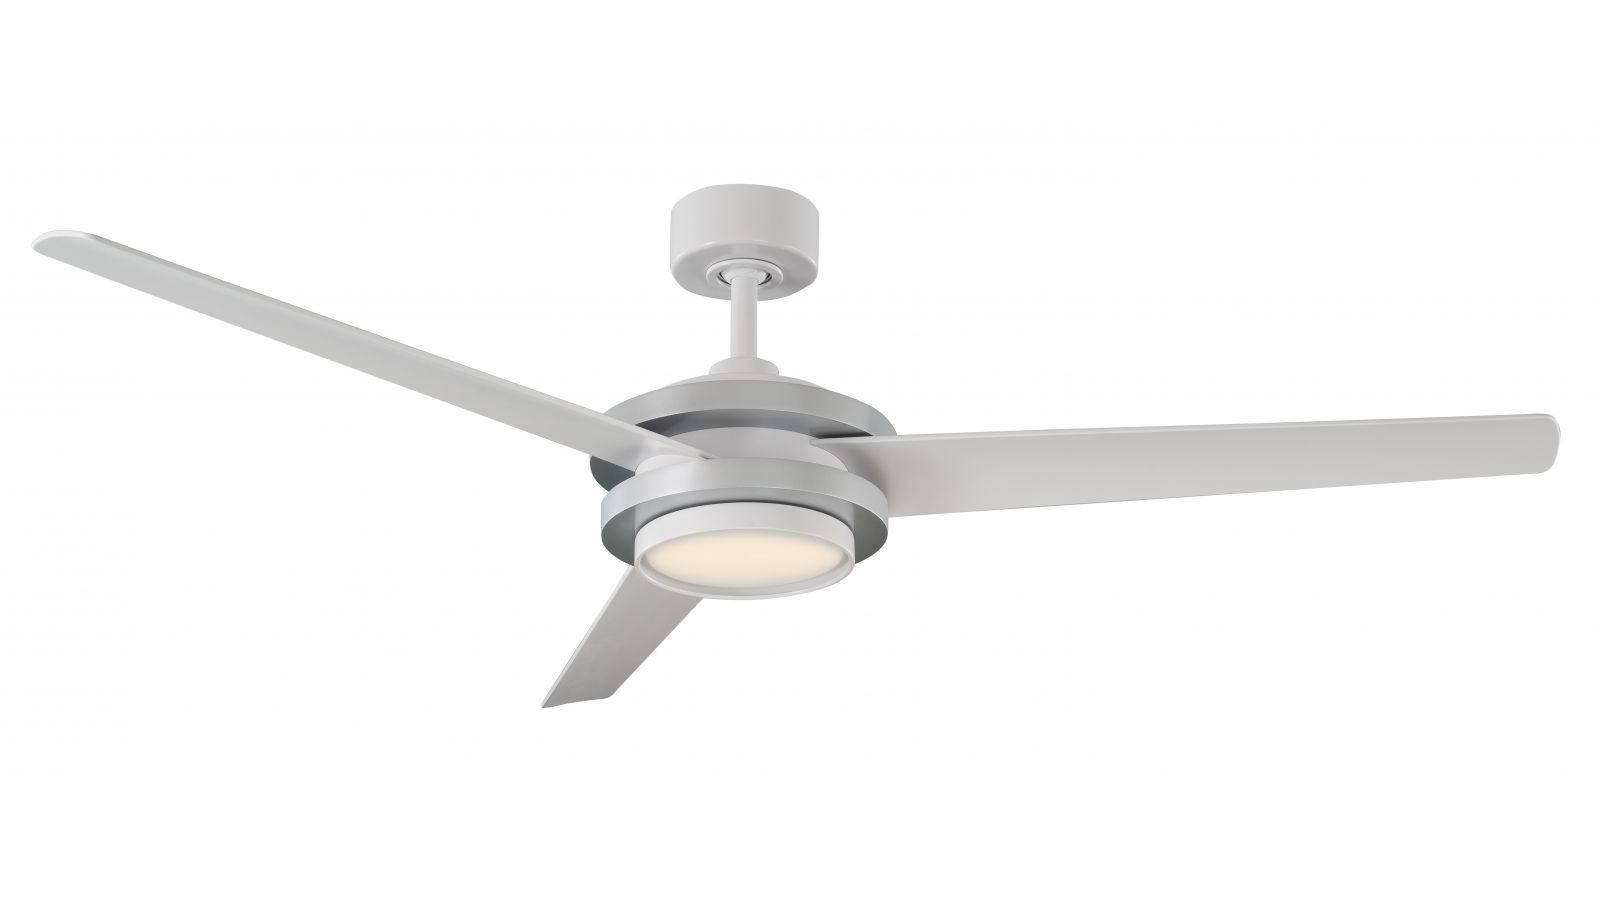 Venus Smart Fan unveiled by Modern Forms